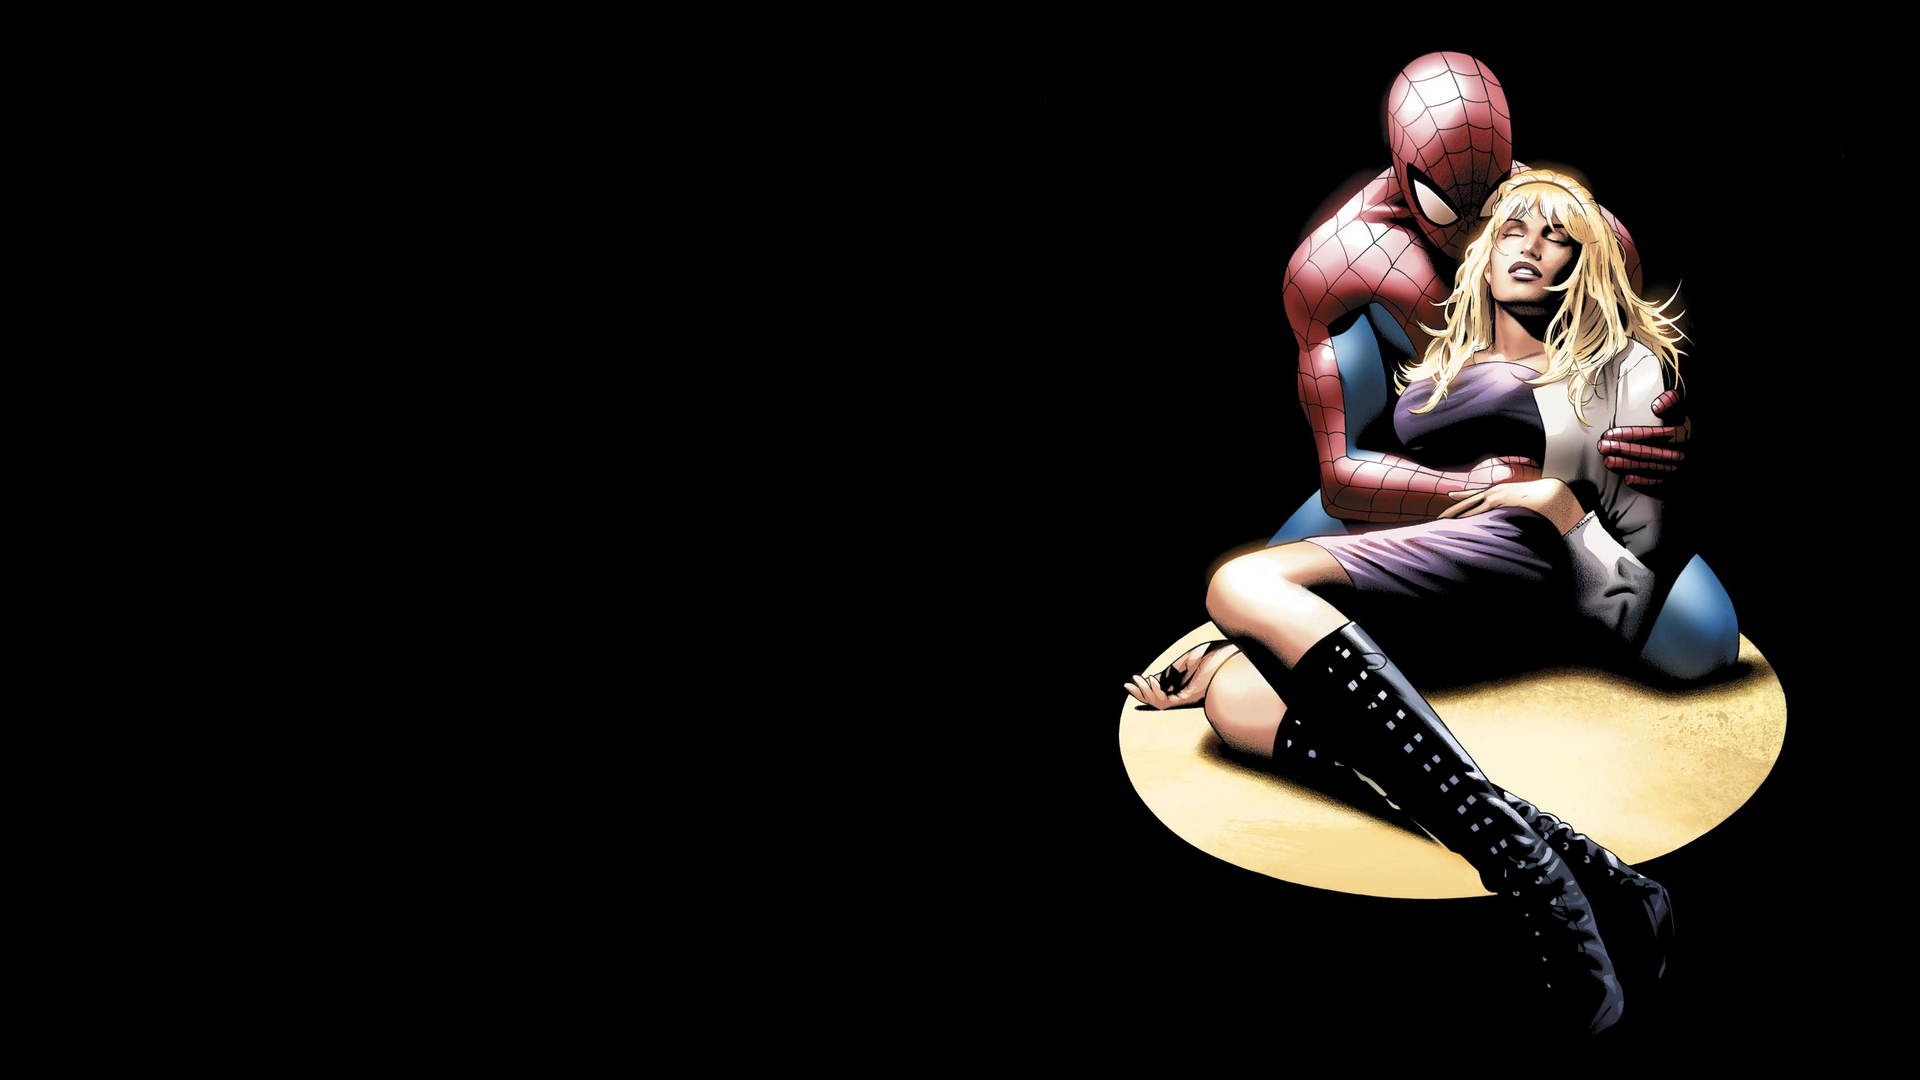 spiderman and mary jane wallpaper